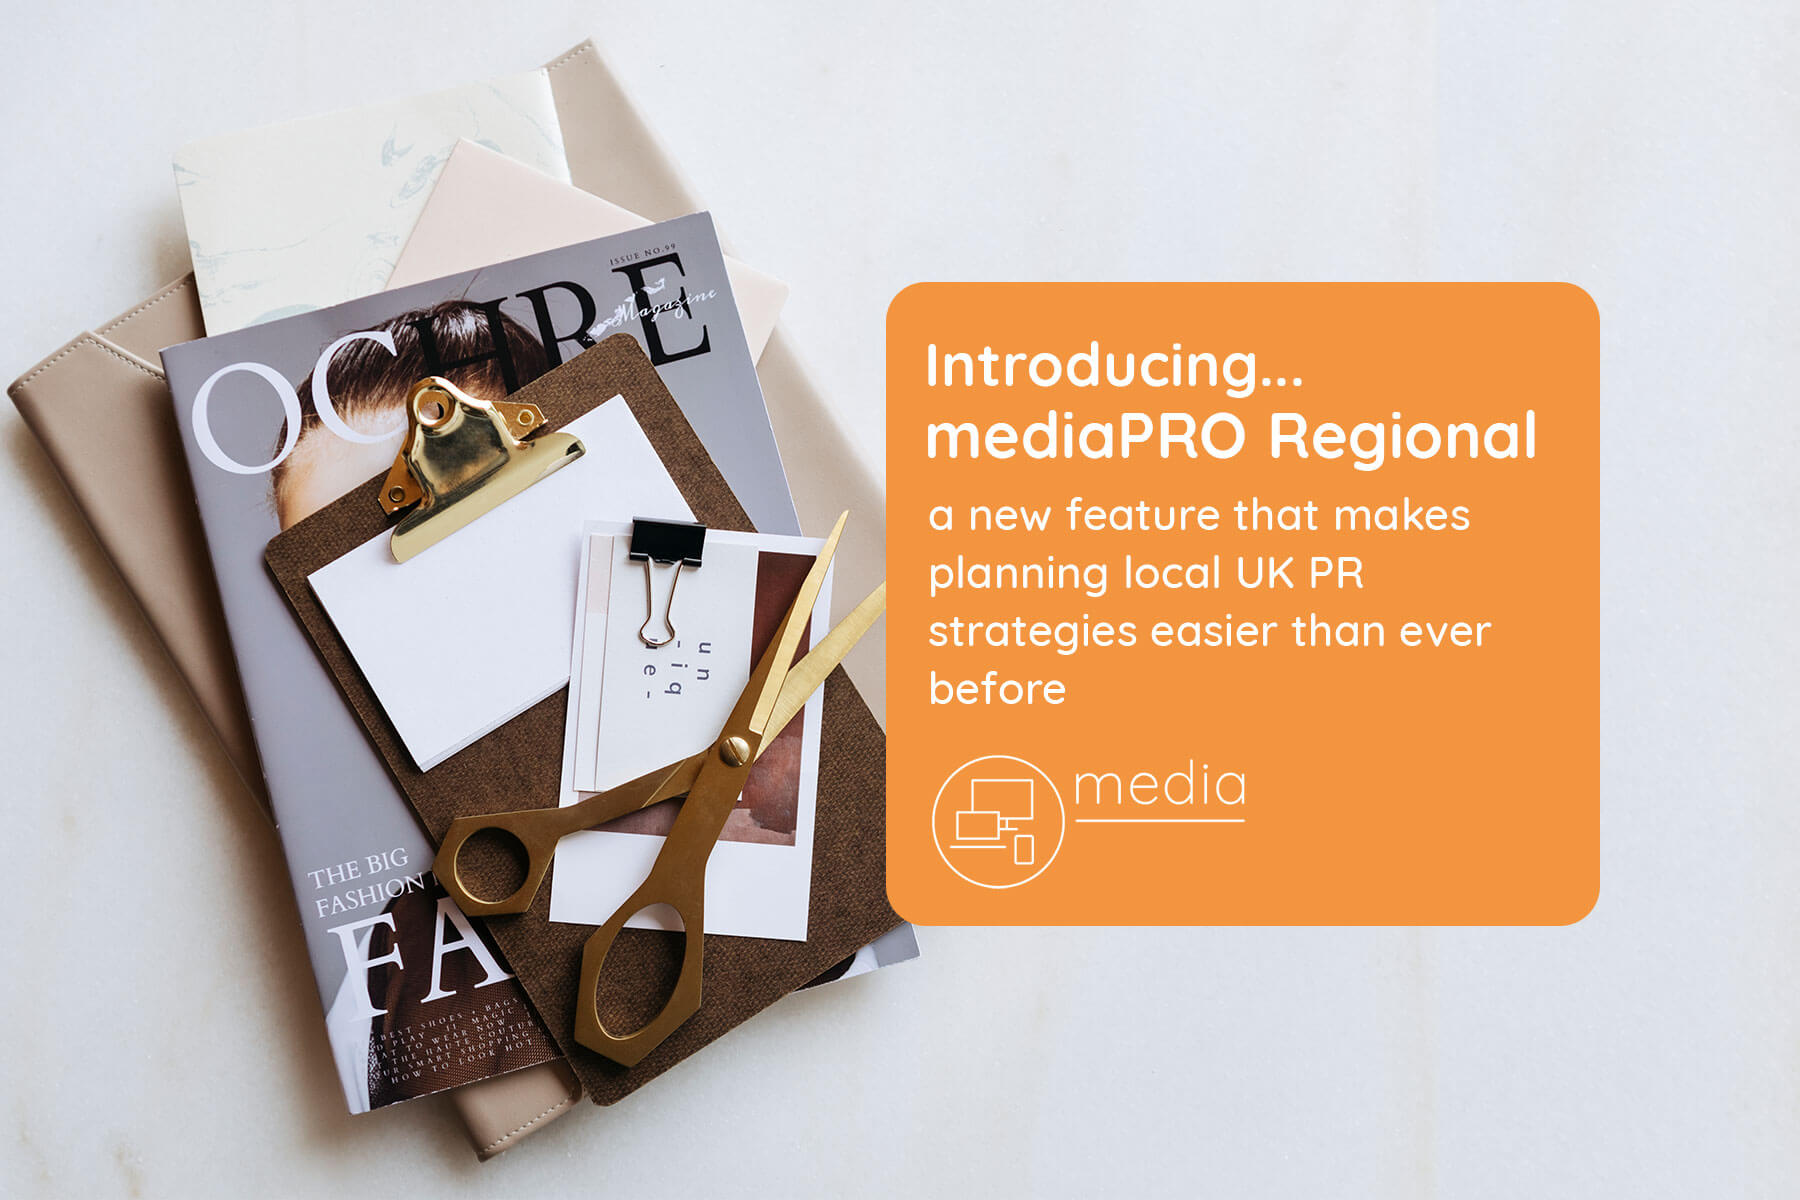 Just In: mmi Launches mediaPRO Regional